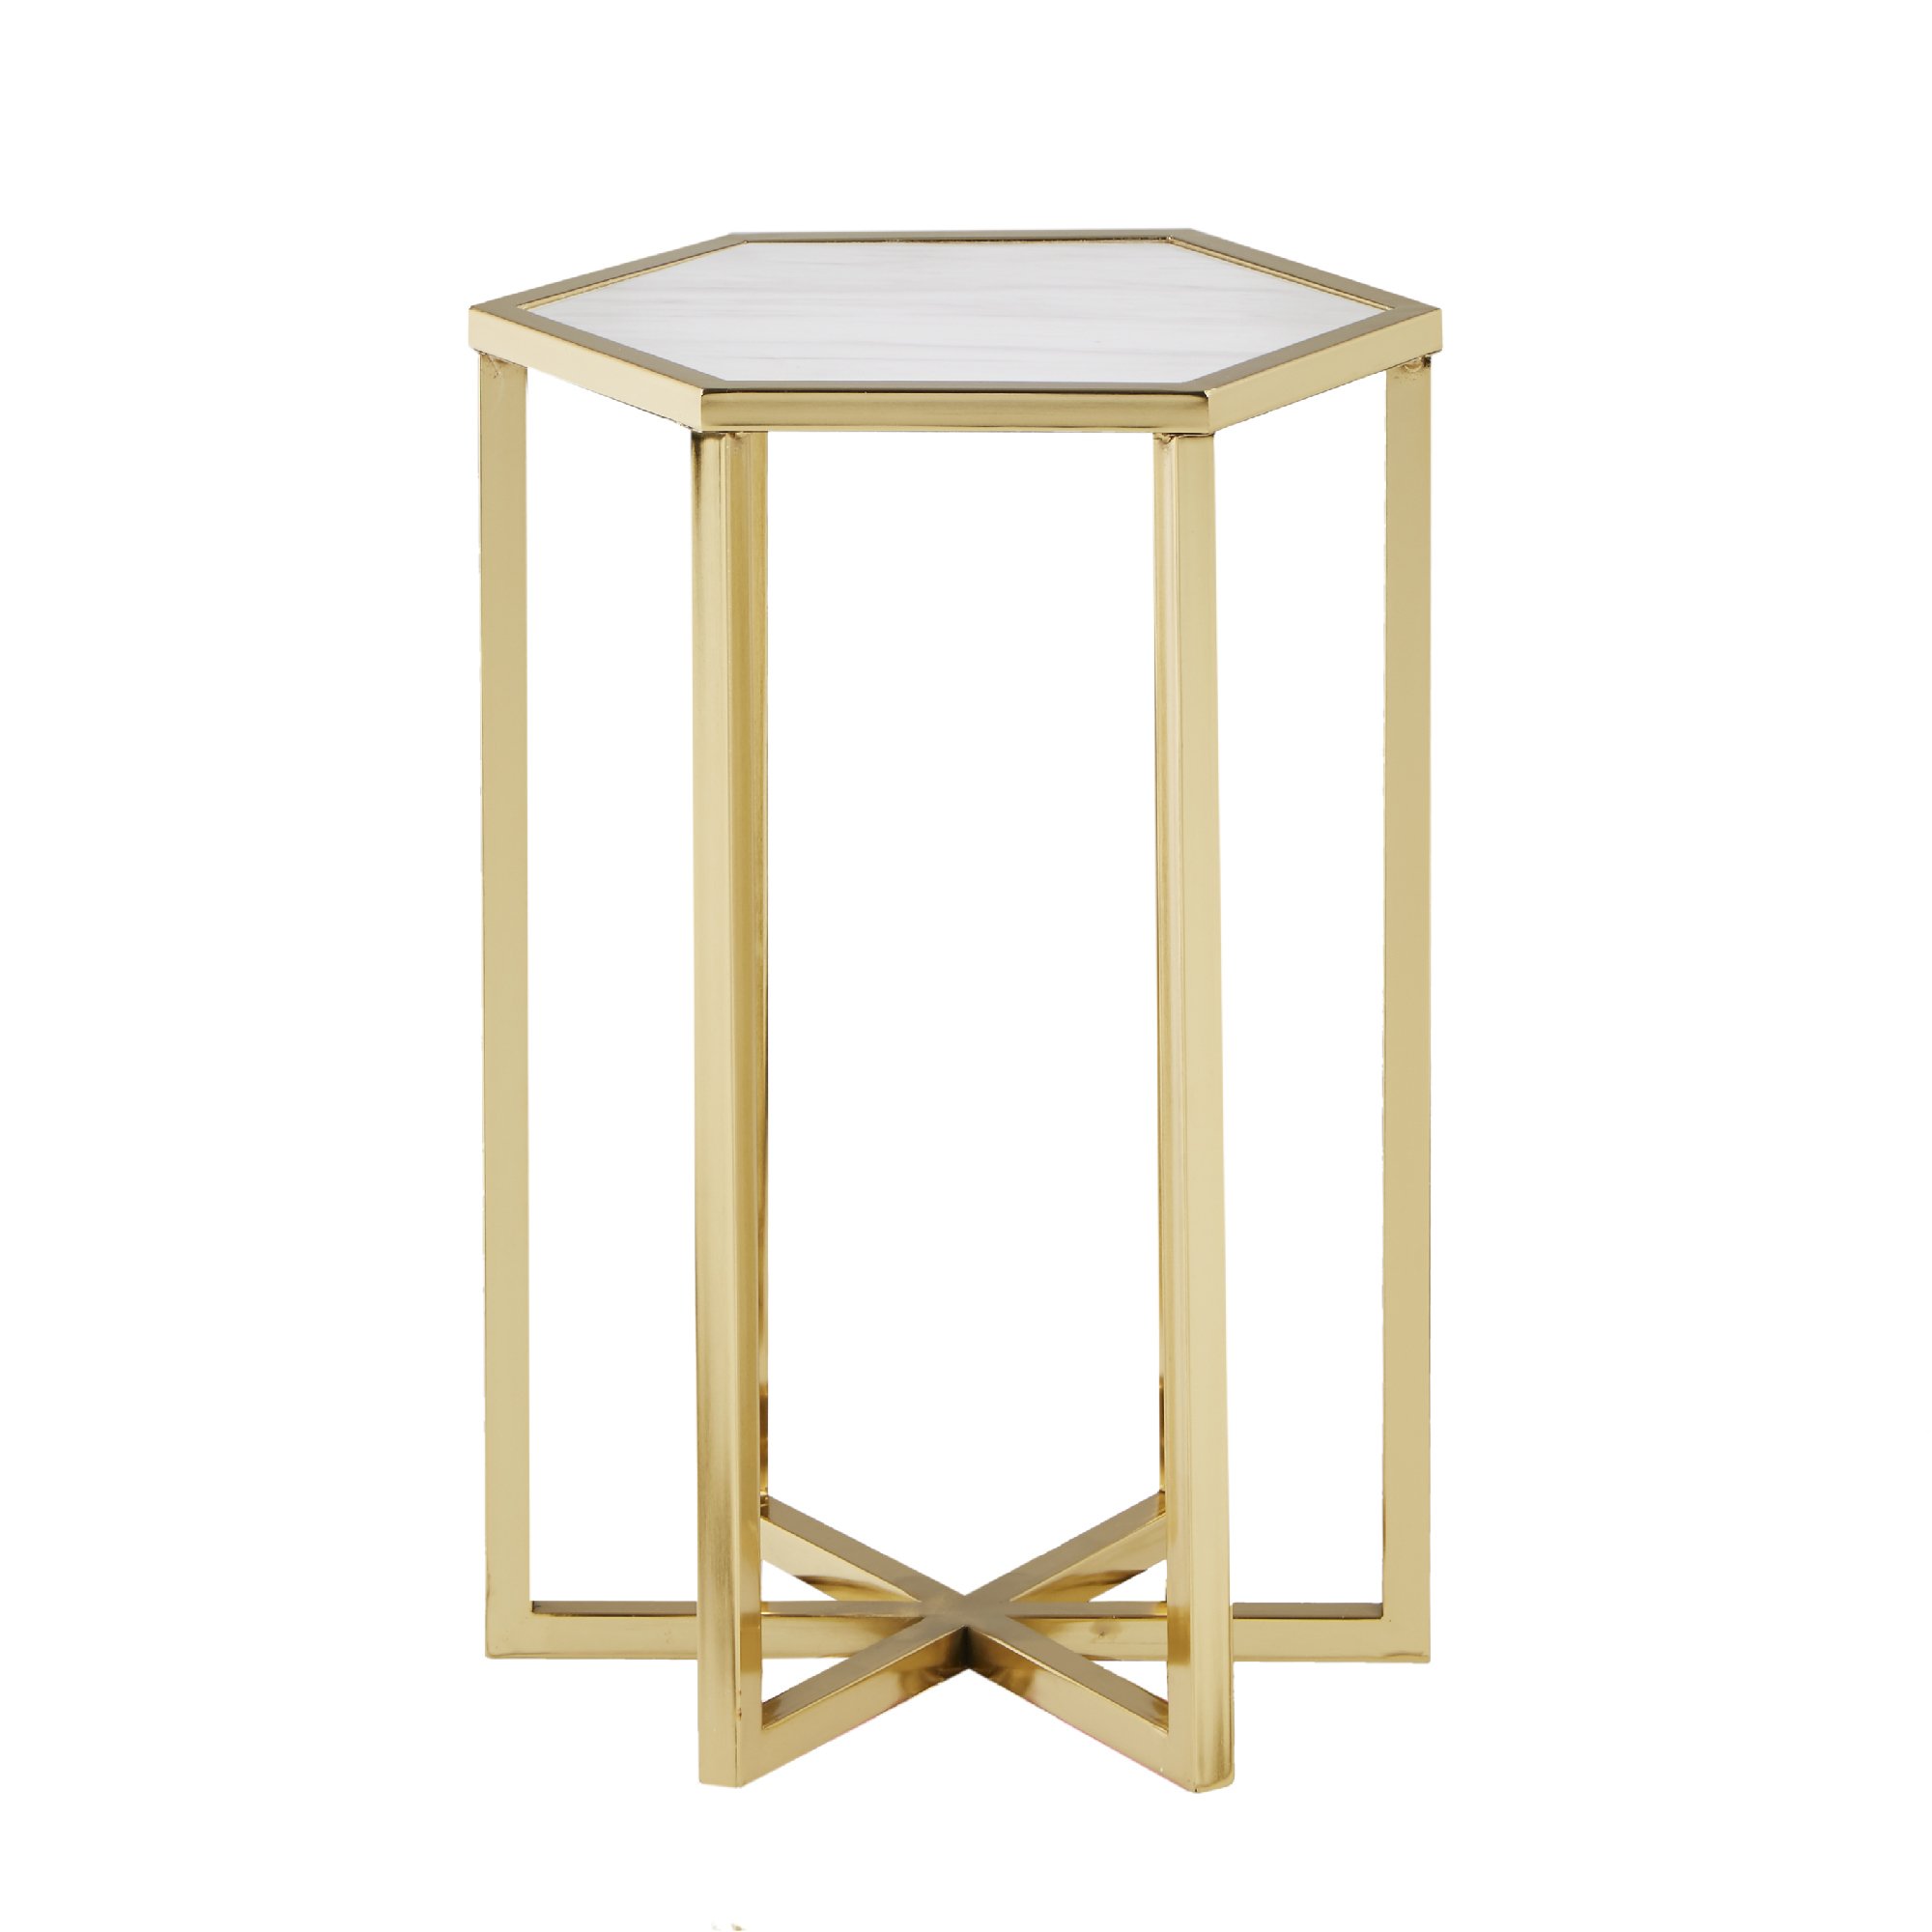 madison park phinney marble gold accent table free end shipping today nesting coffee glass nic blue striped curtains kids writing desk low garden comfortable chairs white drop